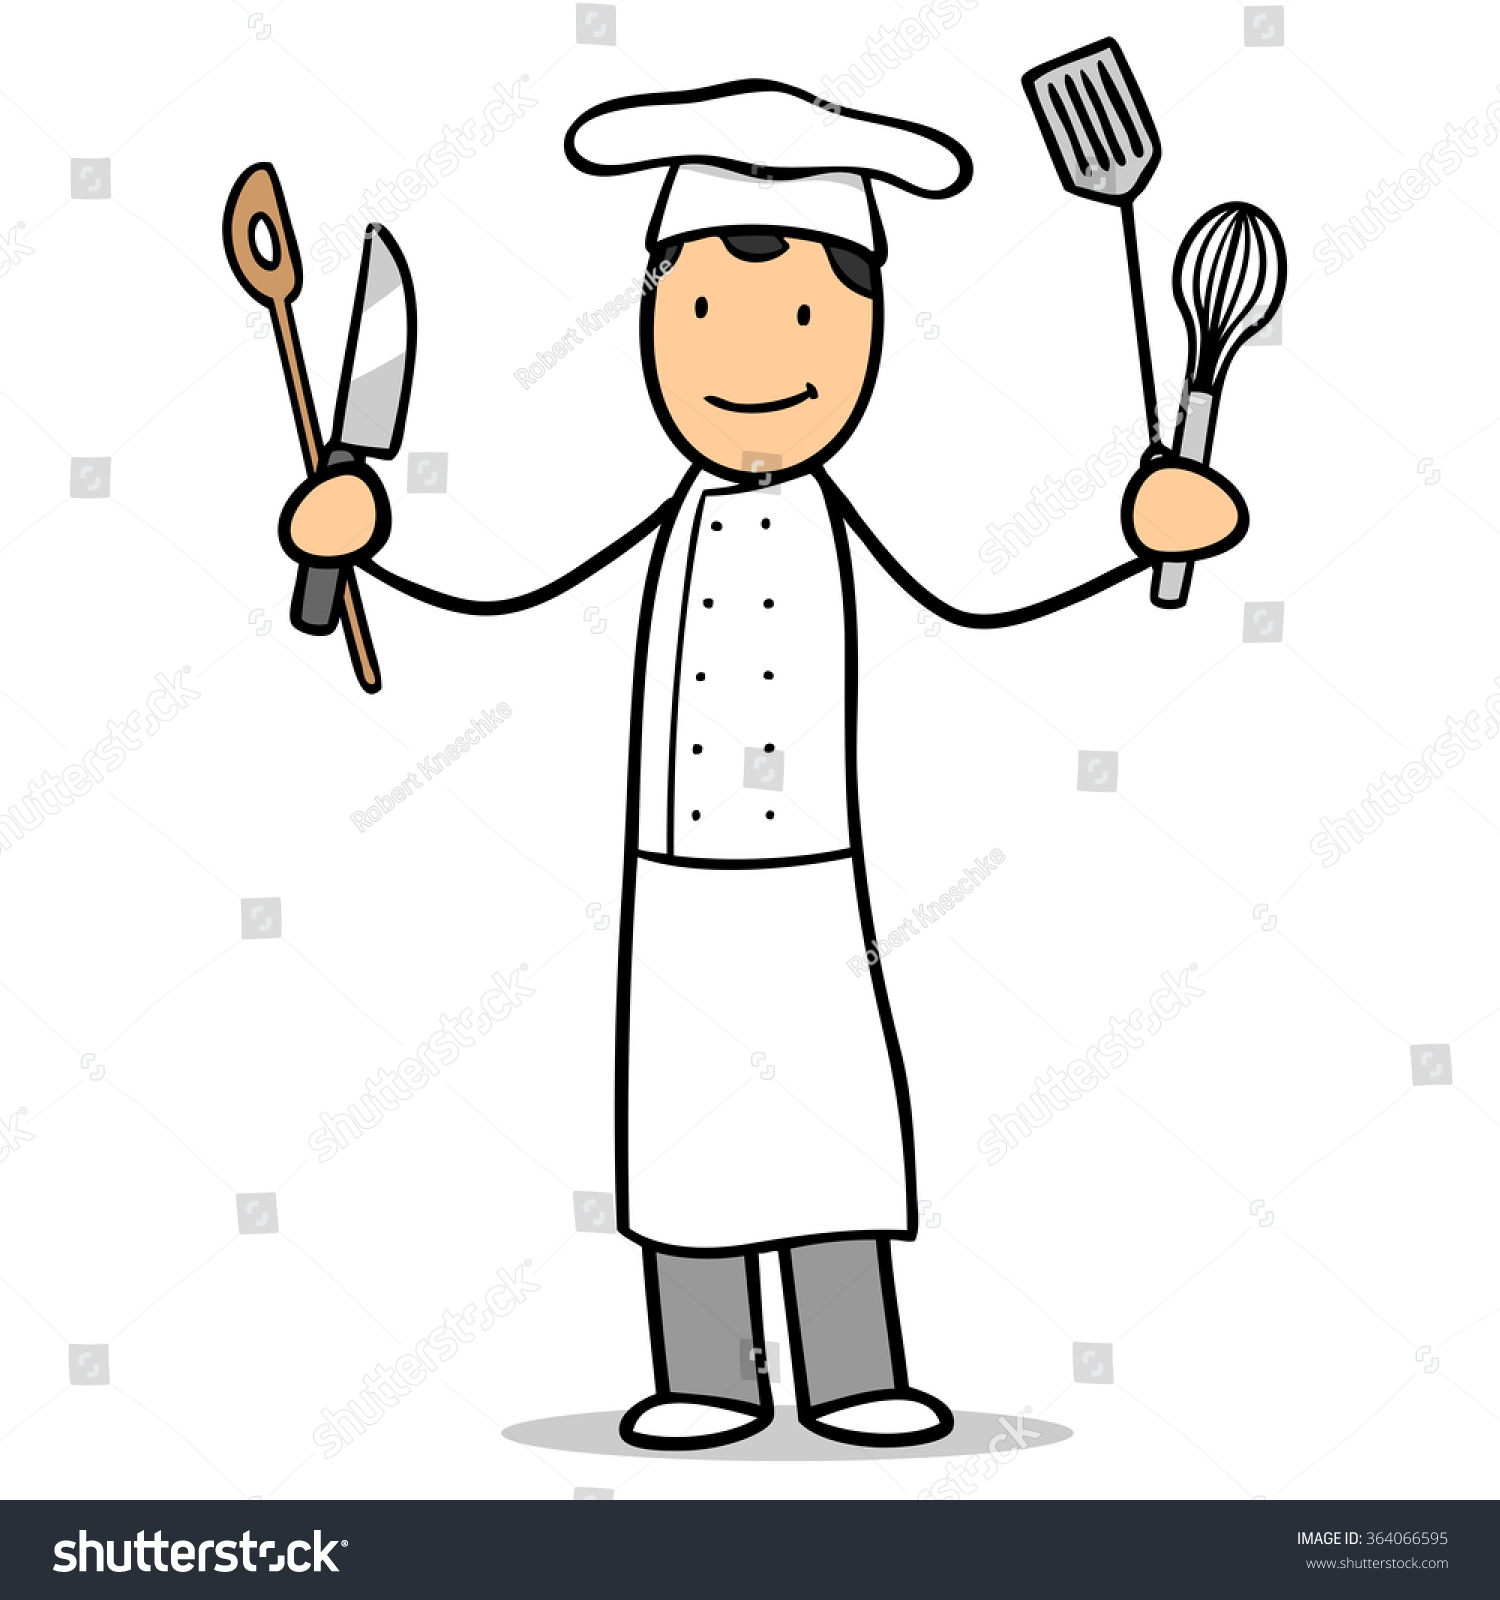 Smiling Cartoon Chef Cook Kitchen Tools Stock Illustration 364066595 ...